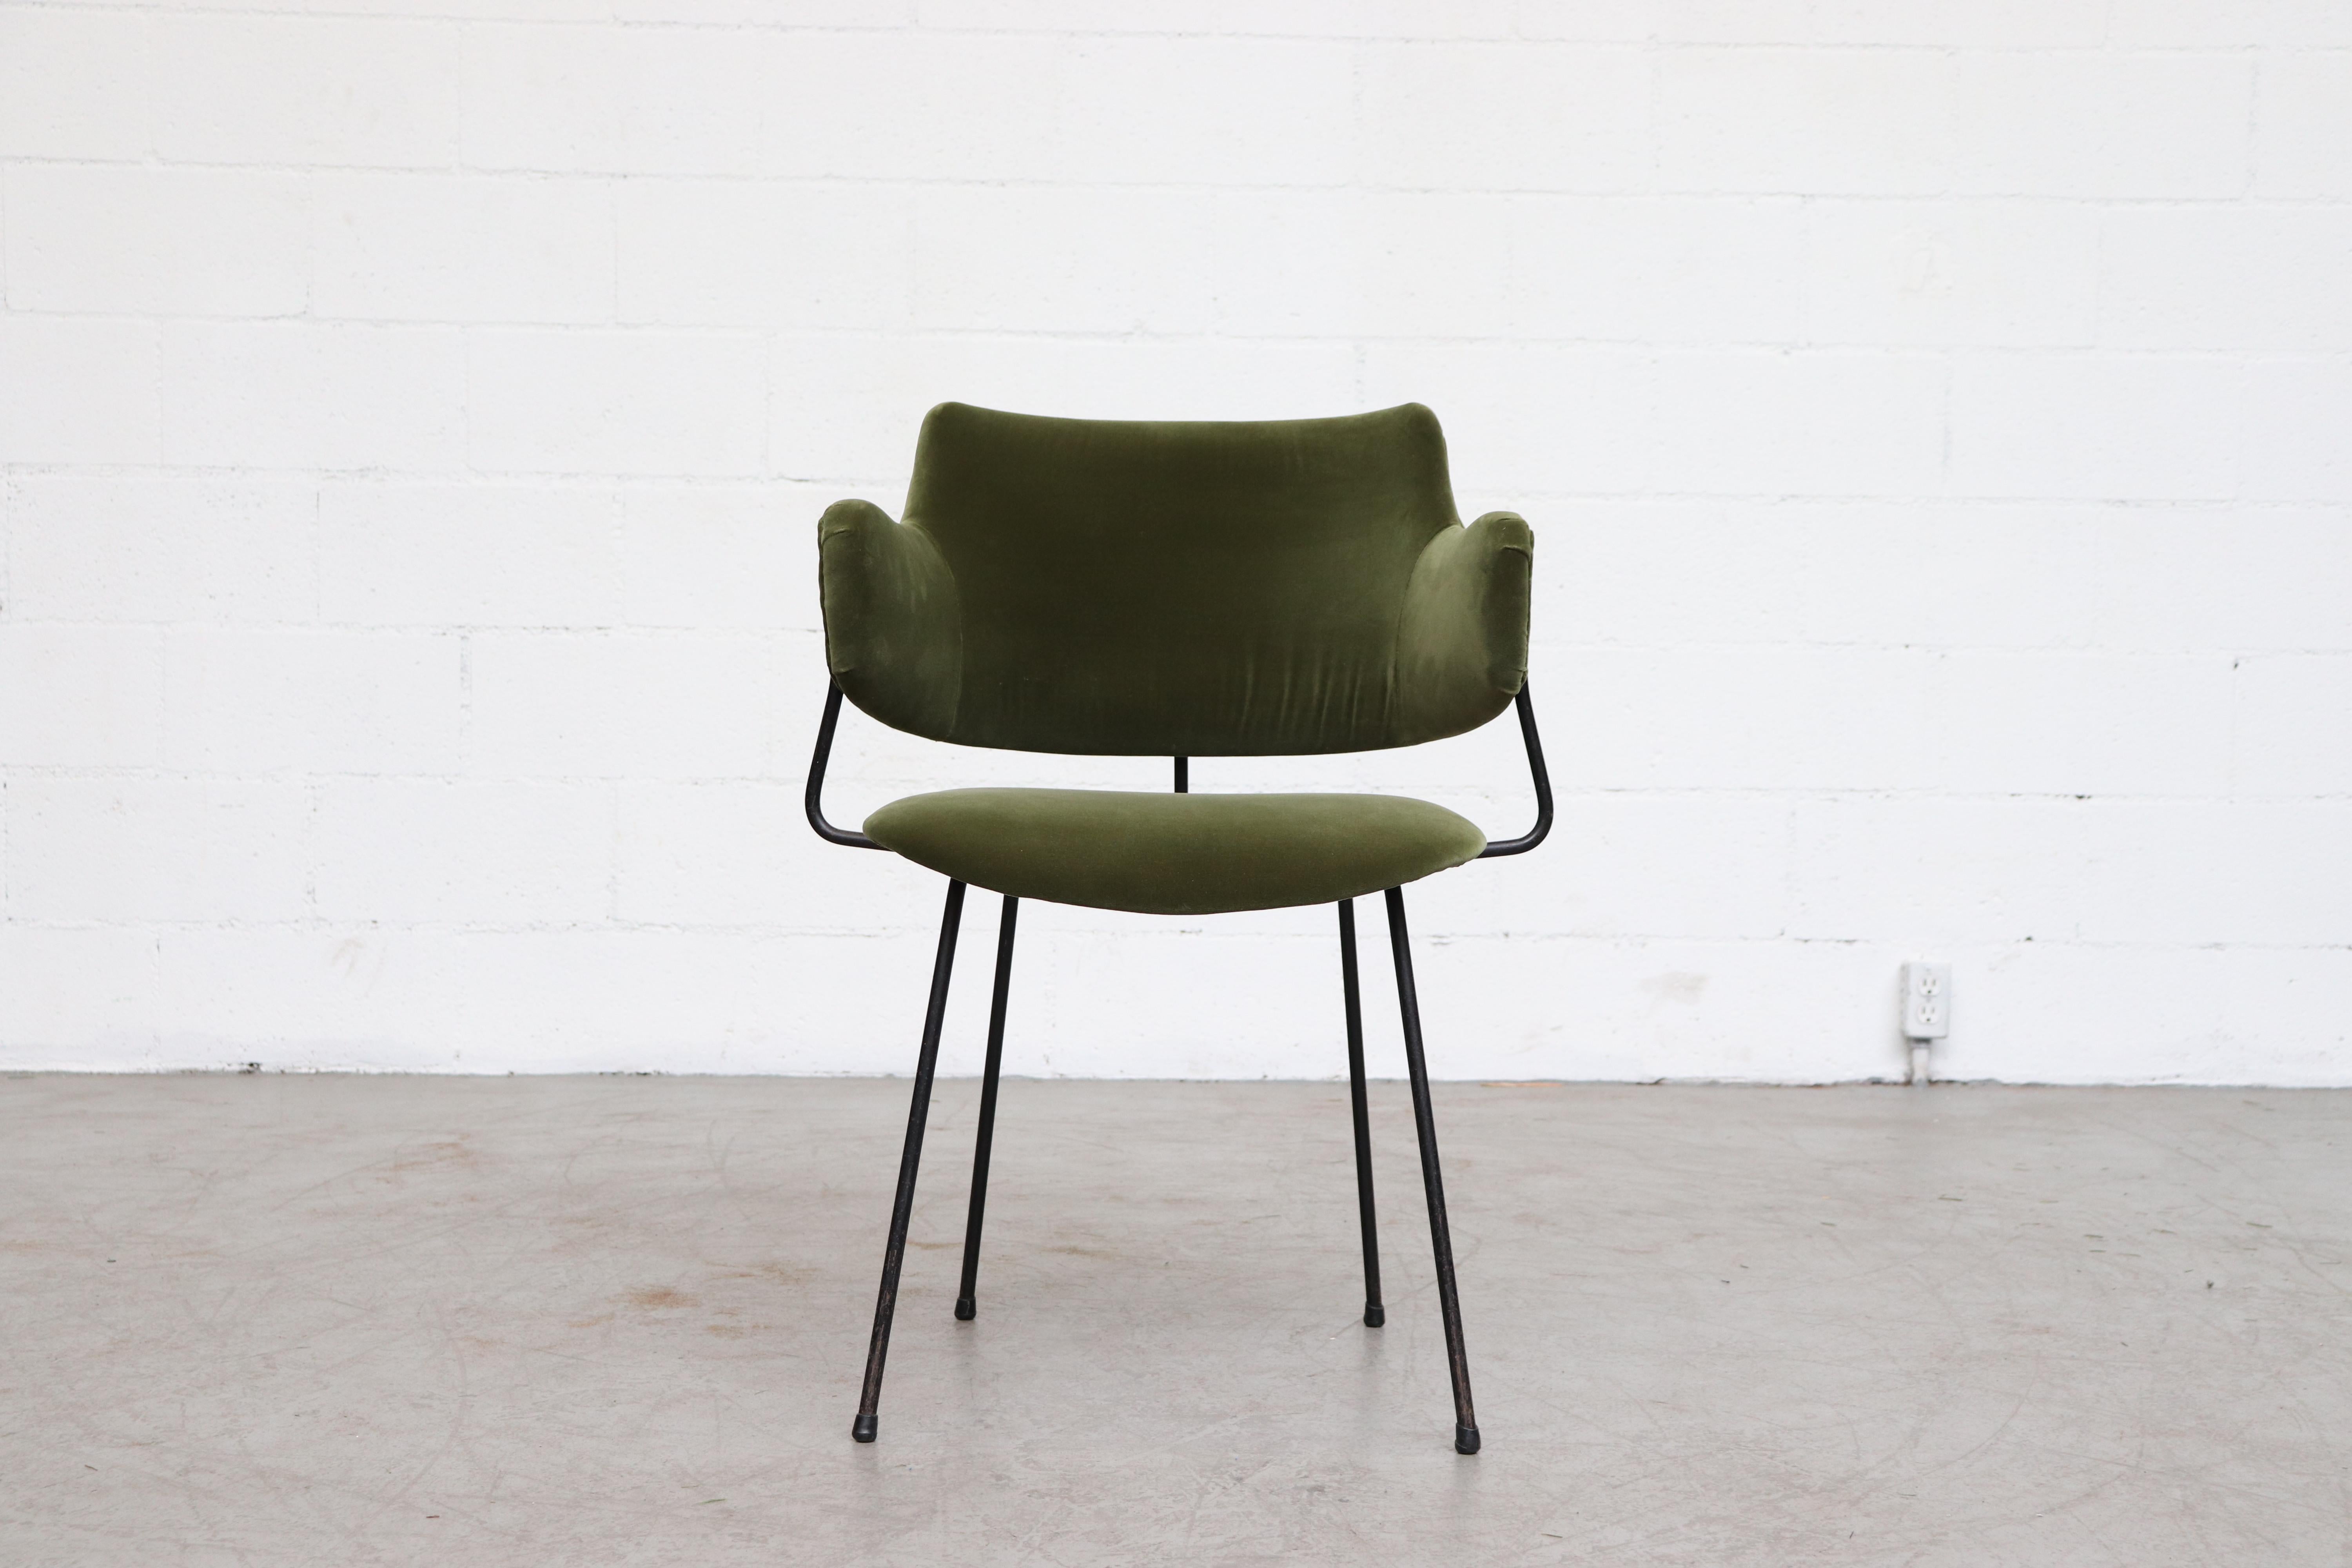 Kembo wire frame armchair. Newly upholstered in olive velvet. Black Wire frame and soft curved edges create a beautiful, distinct silhouette. Frame in original condition with visible signs of wear consistent with its age and use.